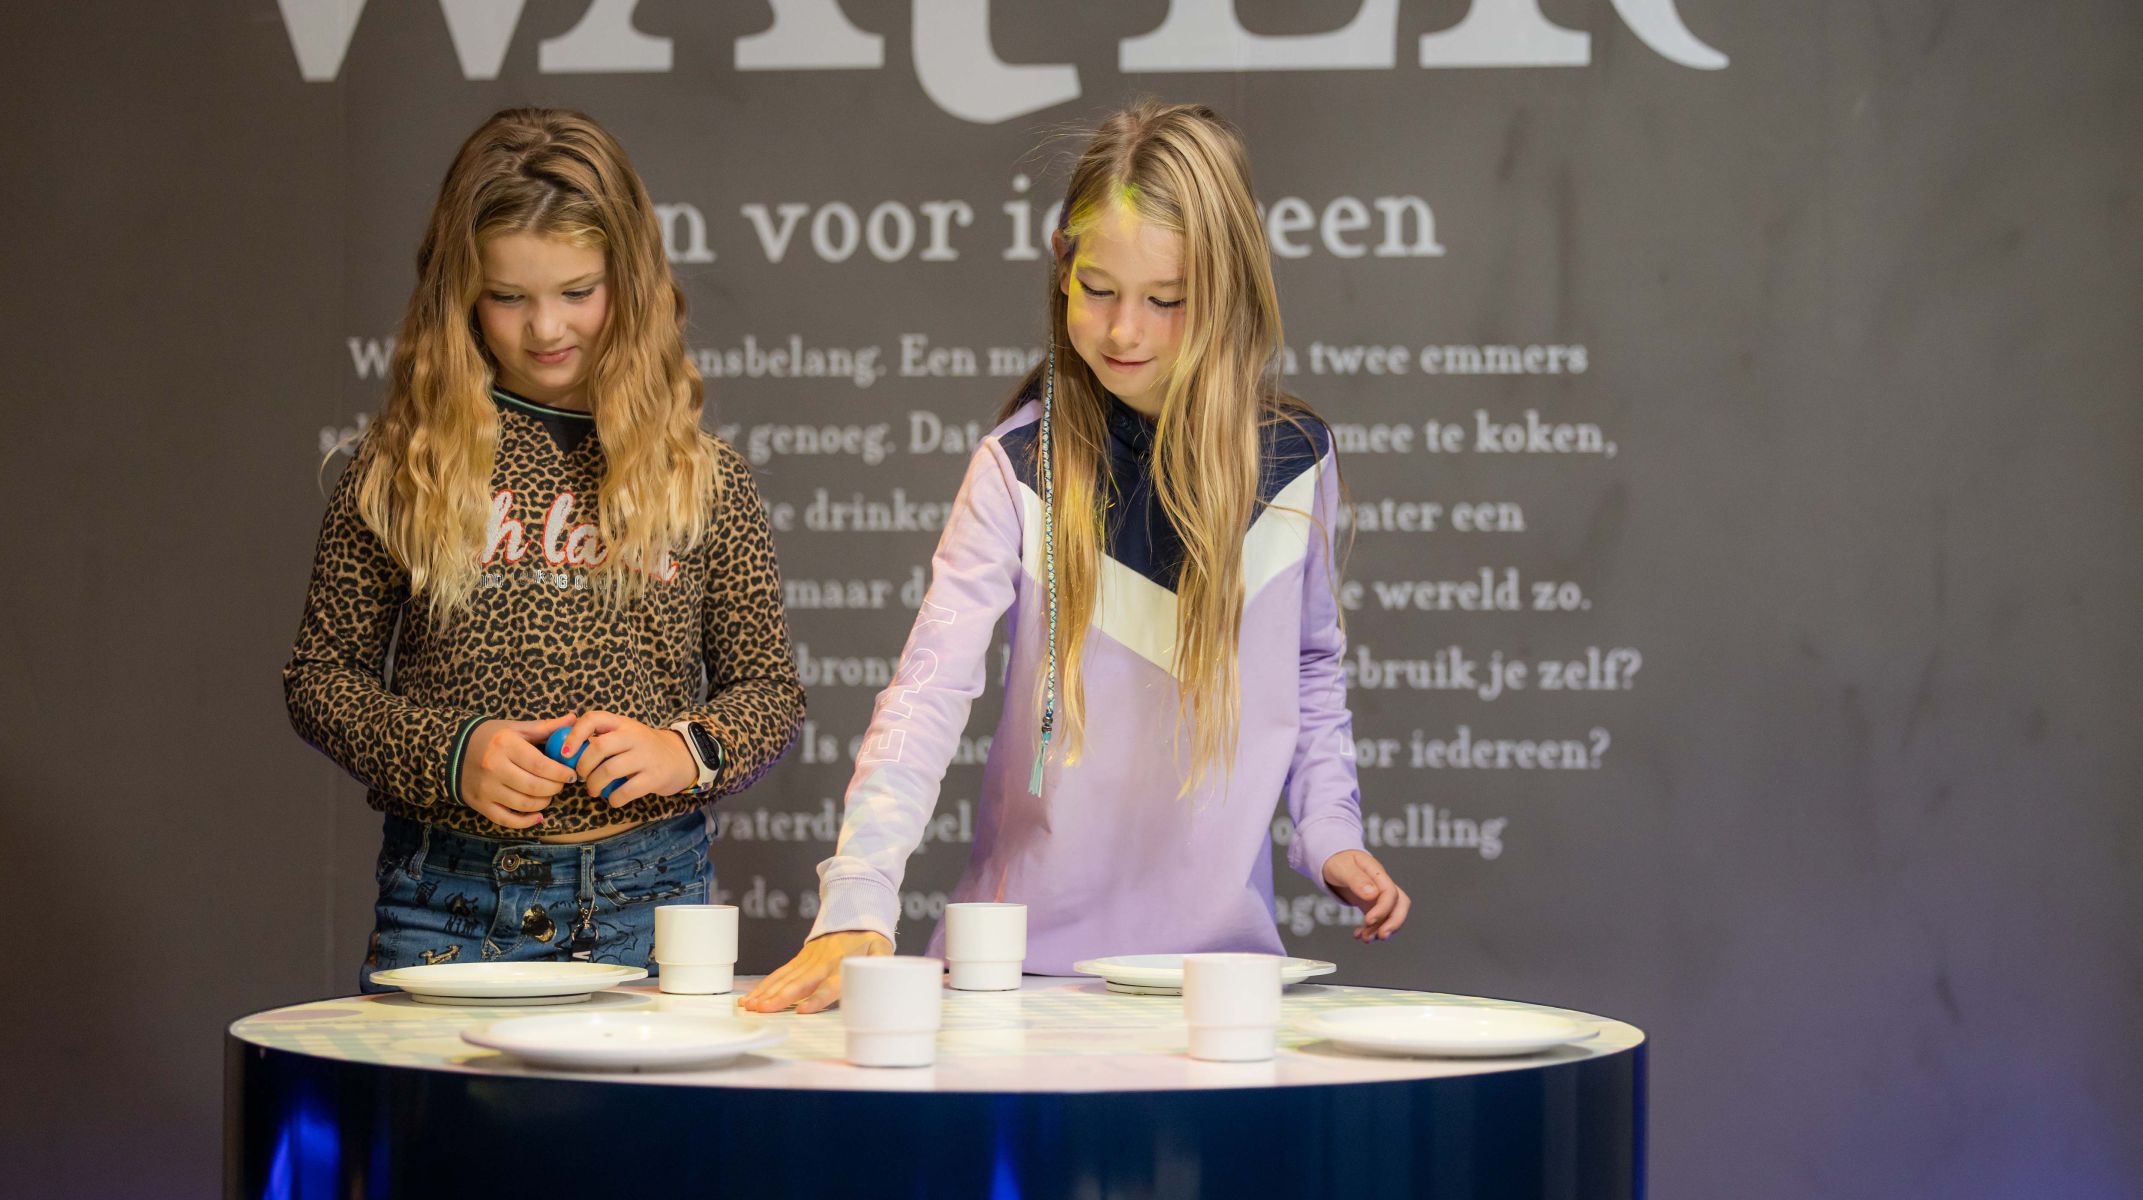 Waterzaal - One Planet Expo